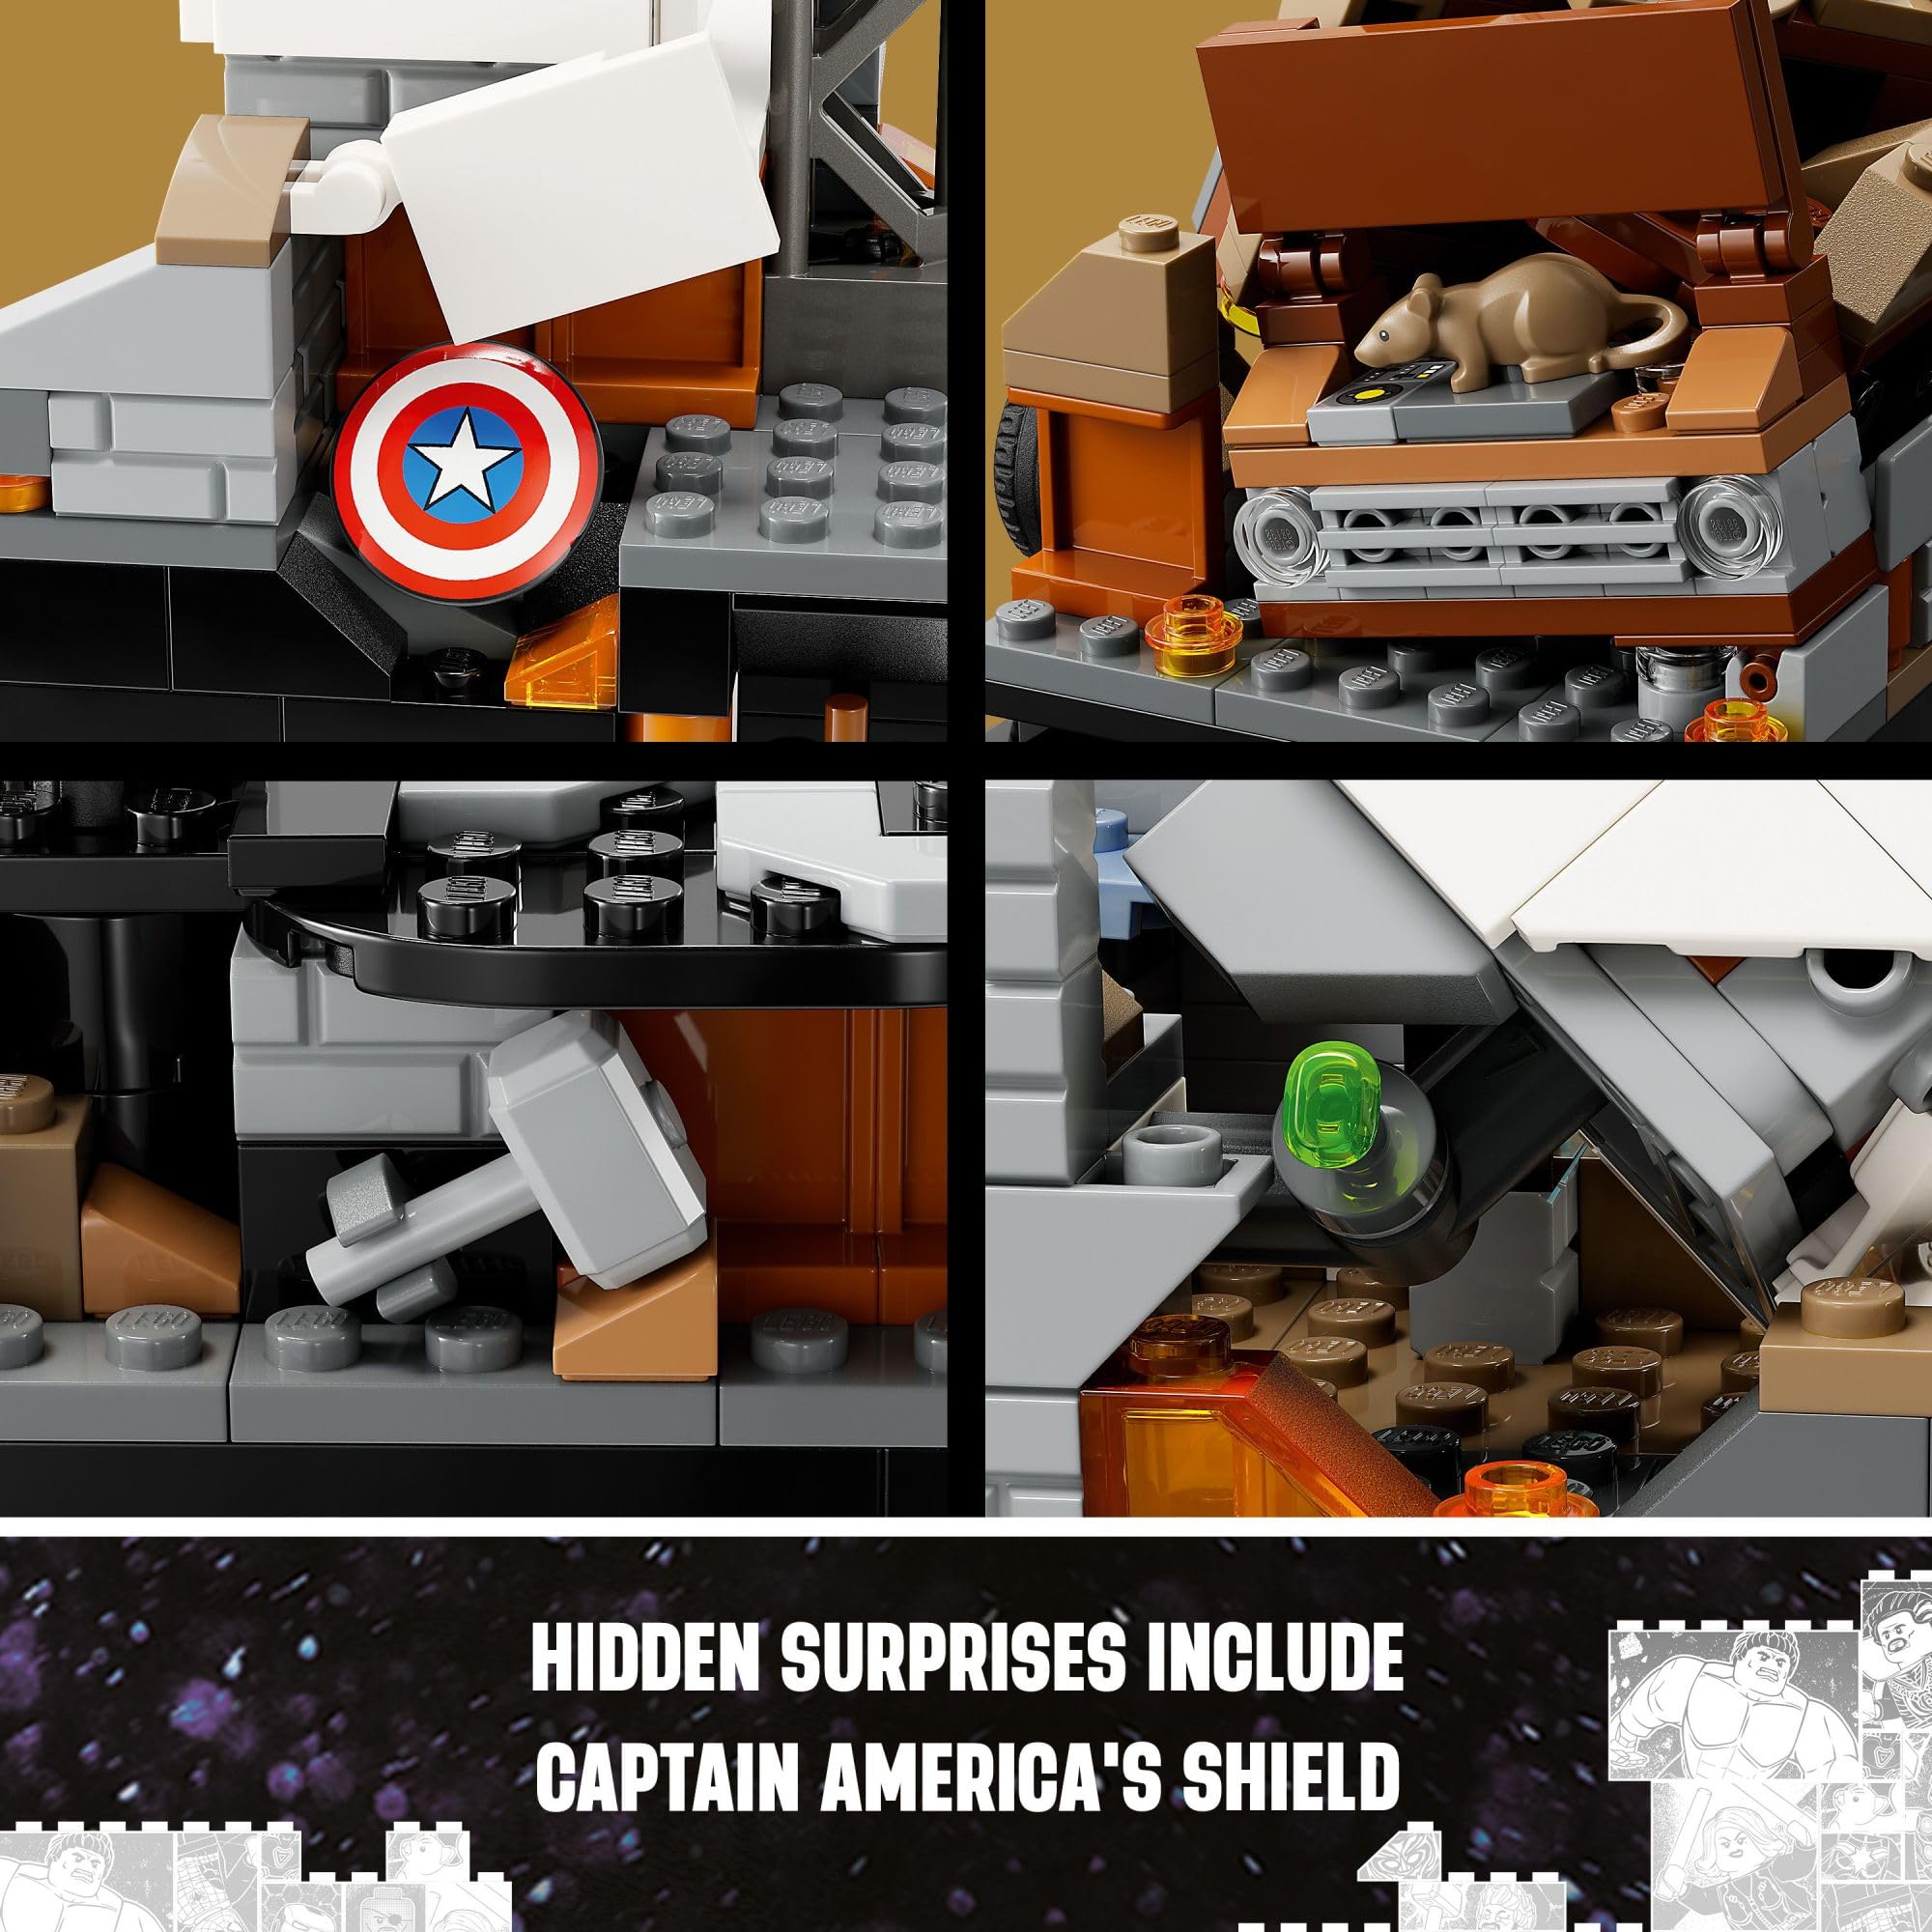 LEGO Marvel Endgame Final Battle 76266 Avengers Model for Build and Display, Collectible Marvel Playset with 6 Minifigures Including Captain Marvel, Shuri and Wanda Maximoff, Marvel Fan Gift Idea